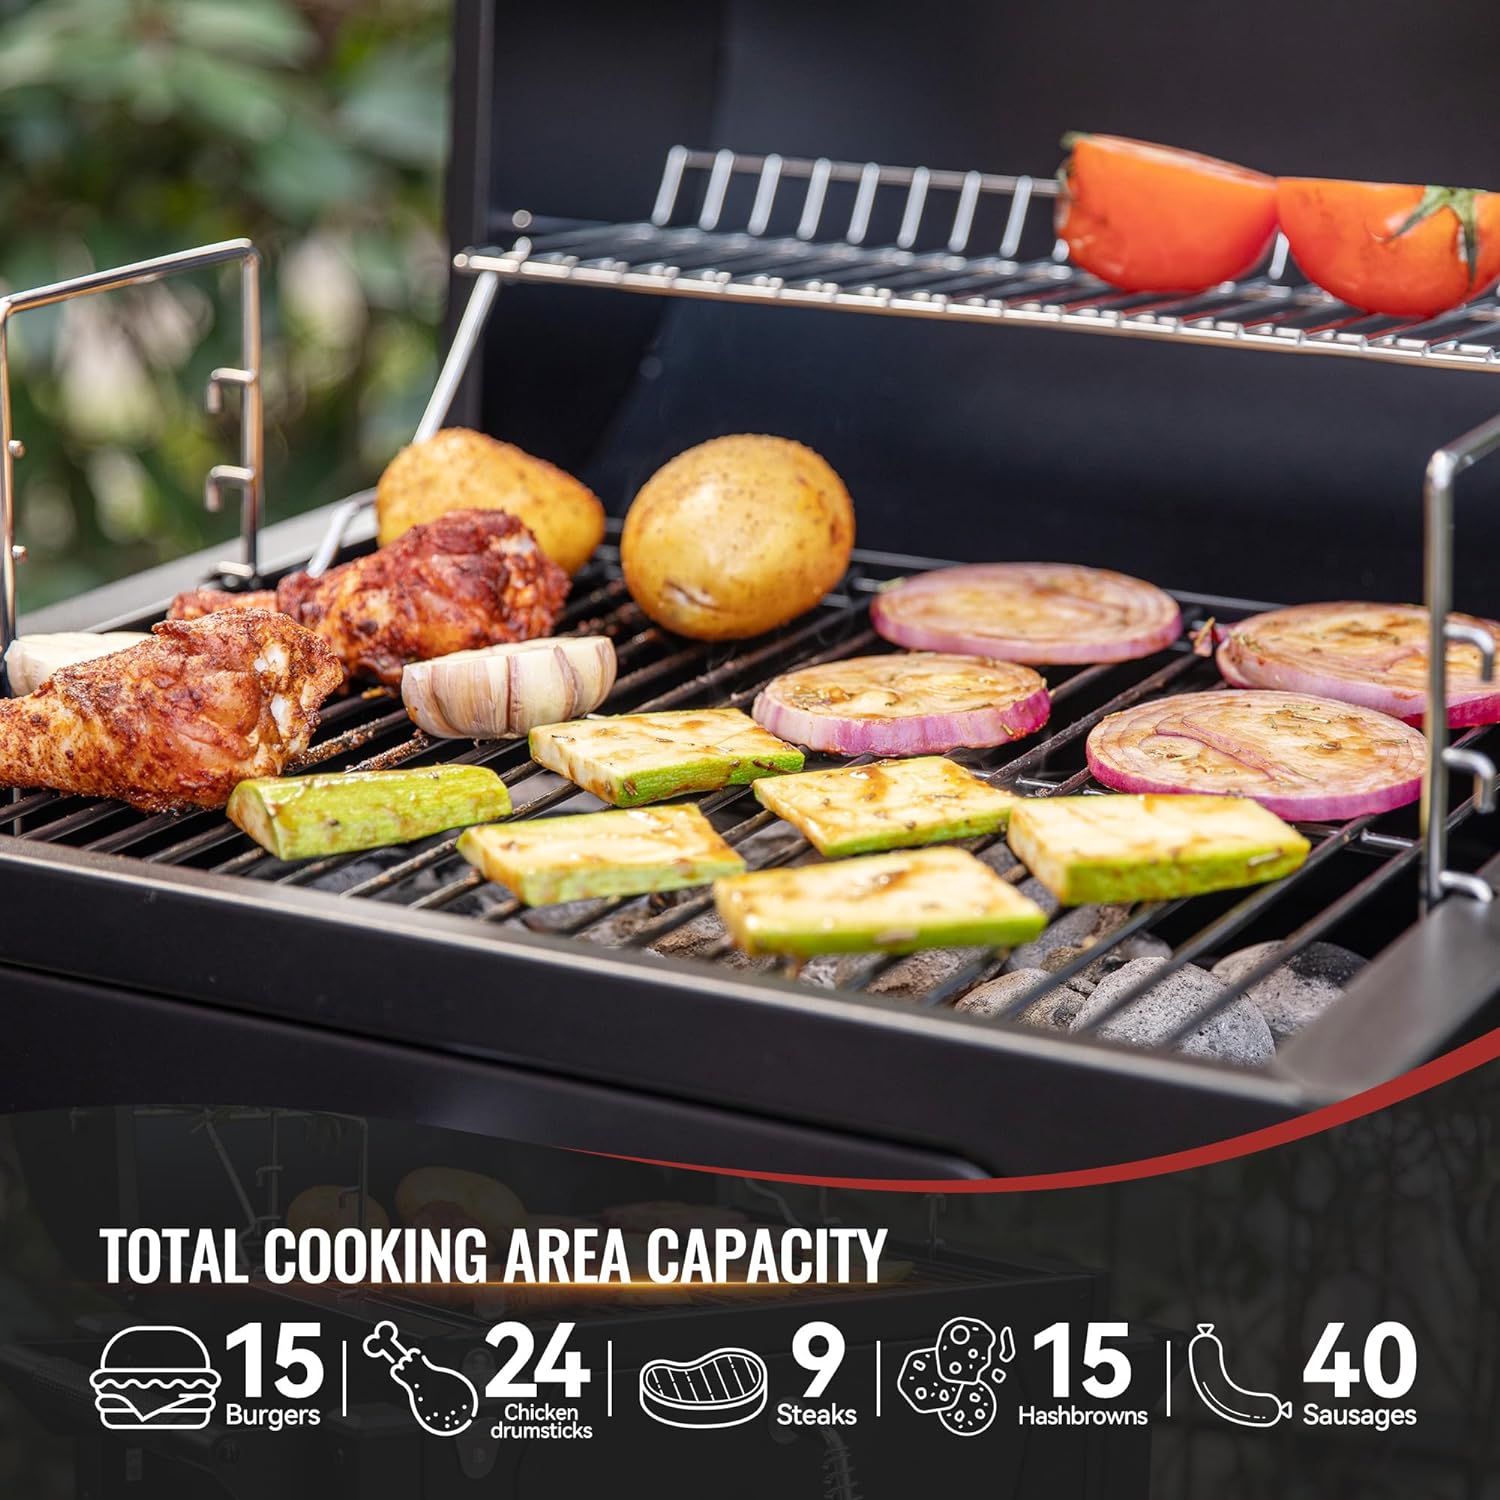 Royal Gourmet CD1519 Portable Charcoal Grill with Two Side Handles, Compact Outdoor Tabletop Charcoal Grill with Bottle Opener, for Travel Picnic Tailgate and Campsite BBQ Cooking, Black